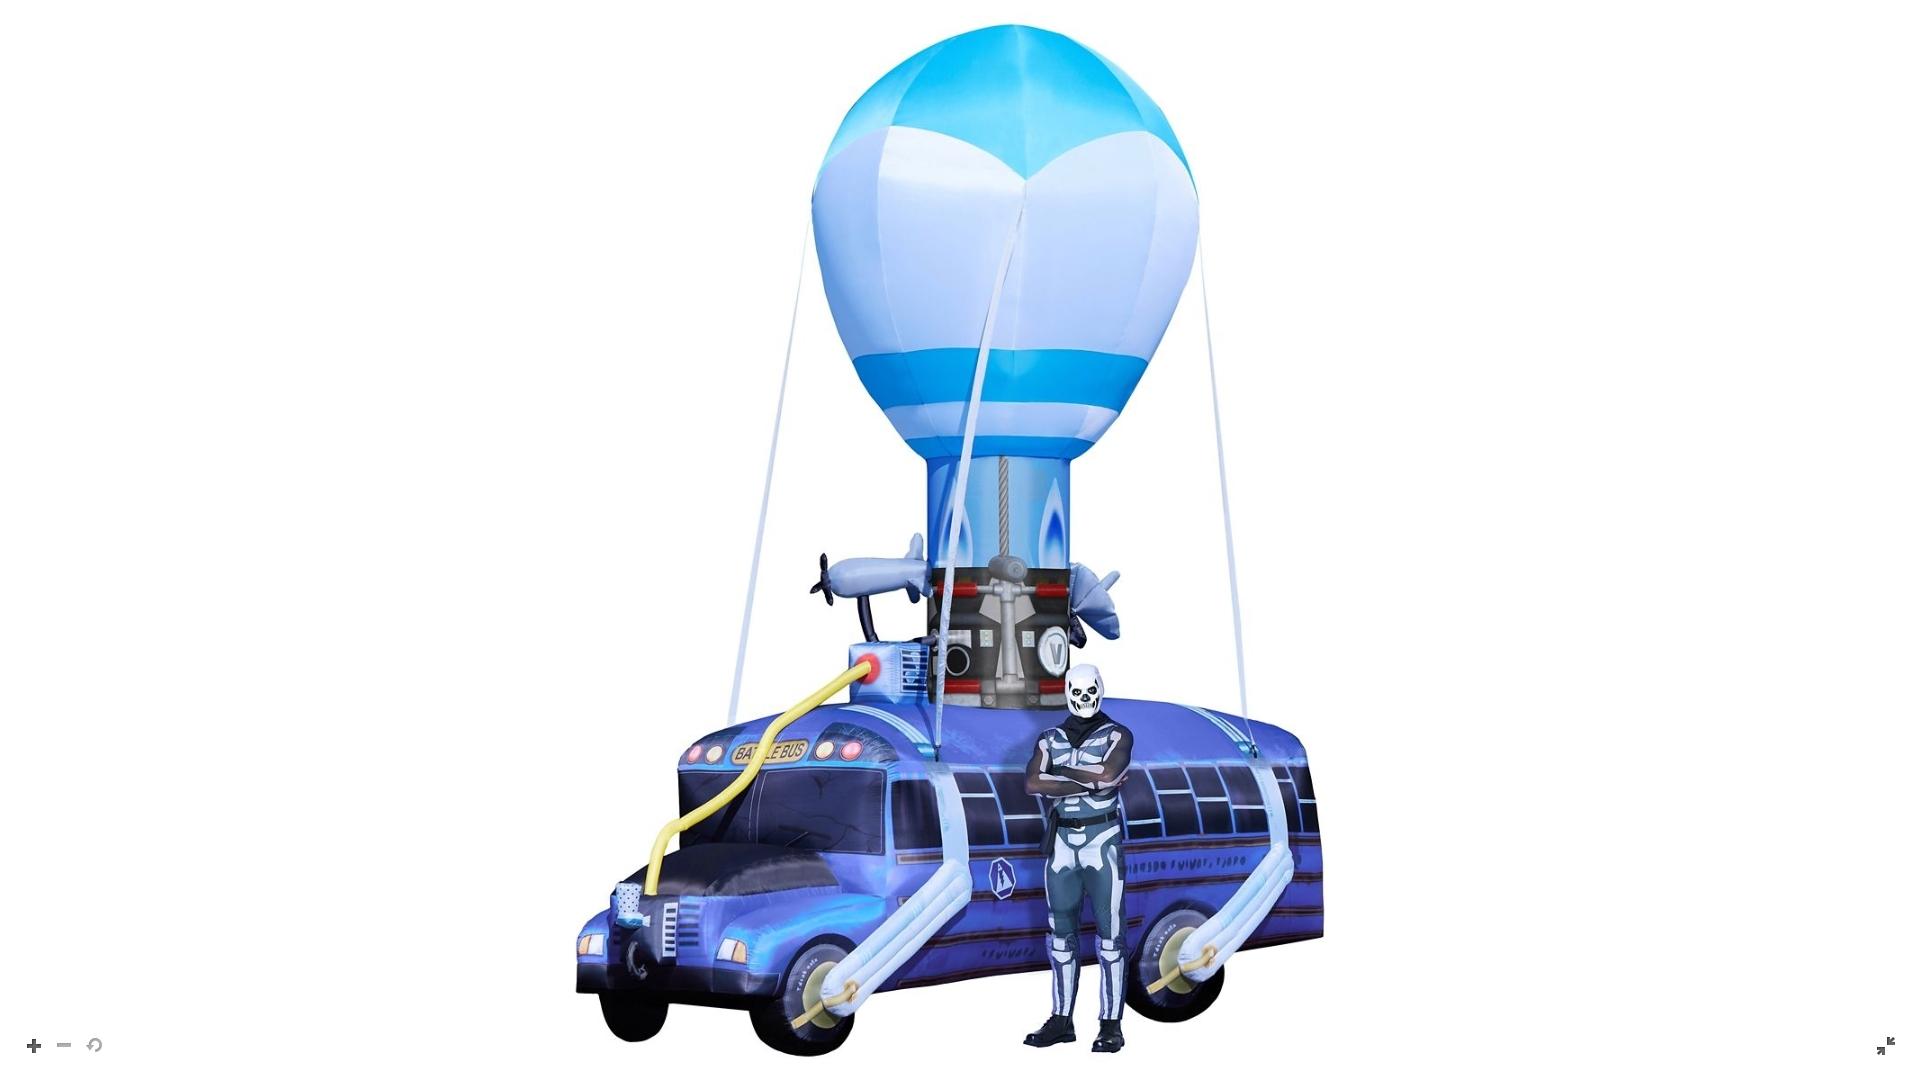 You Can Buy A 17 Feet Tall Inflatable Fortnite Battle Bus For $500